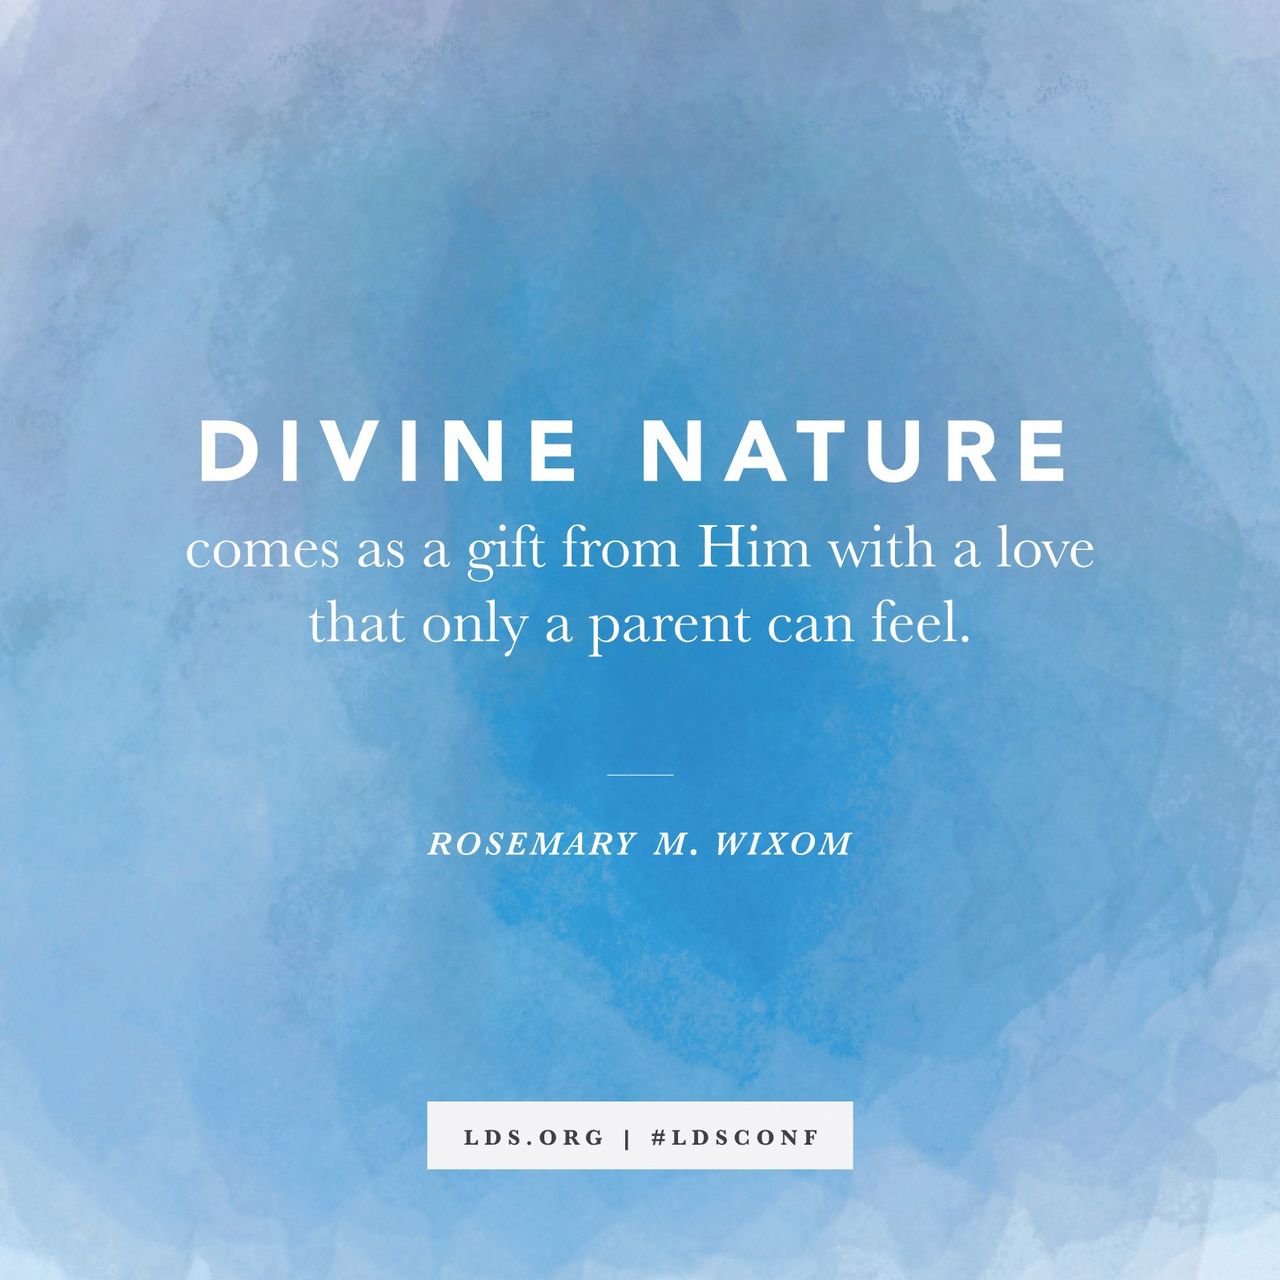 “Divine nature comes as a gift from Him with a love that only a parent can feel.” —Sister Rosemary M. Wixom, “Discovering the Divinity Within”